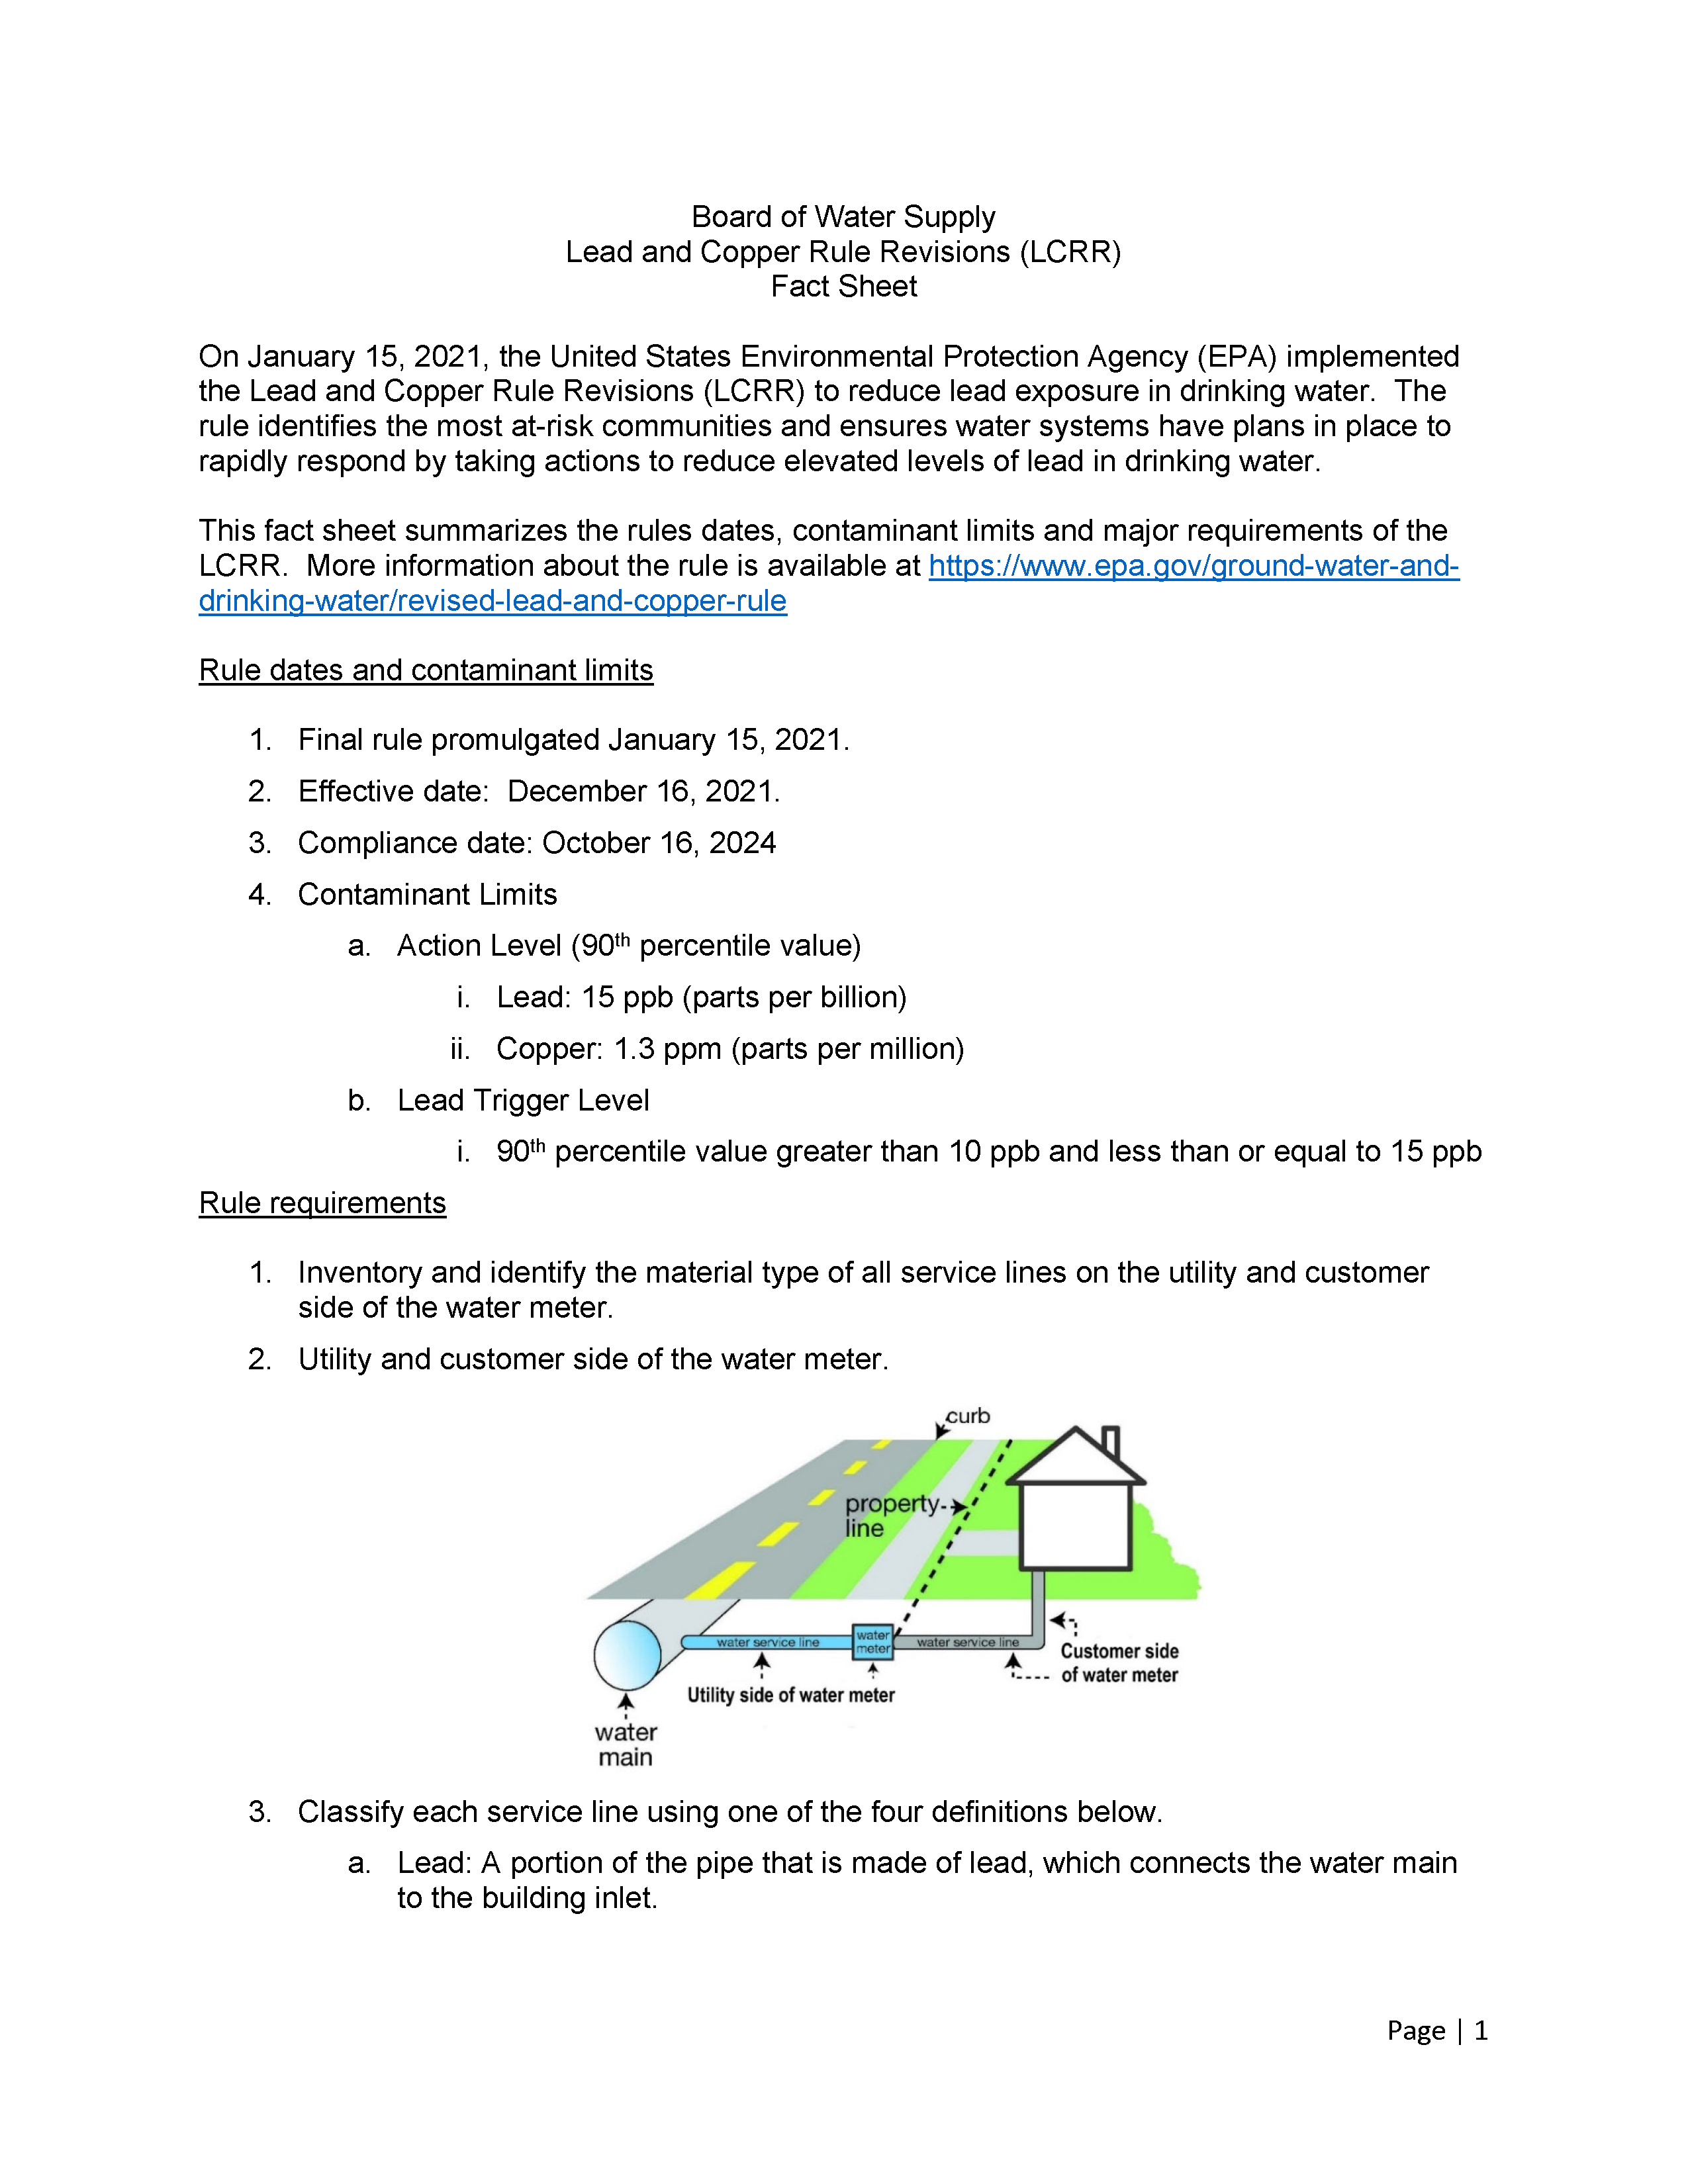 lead and copper rule revision fact sheet